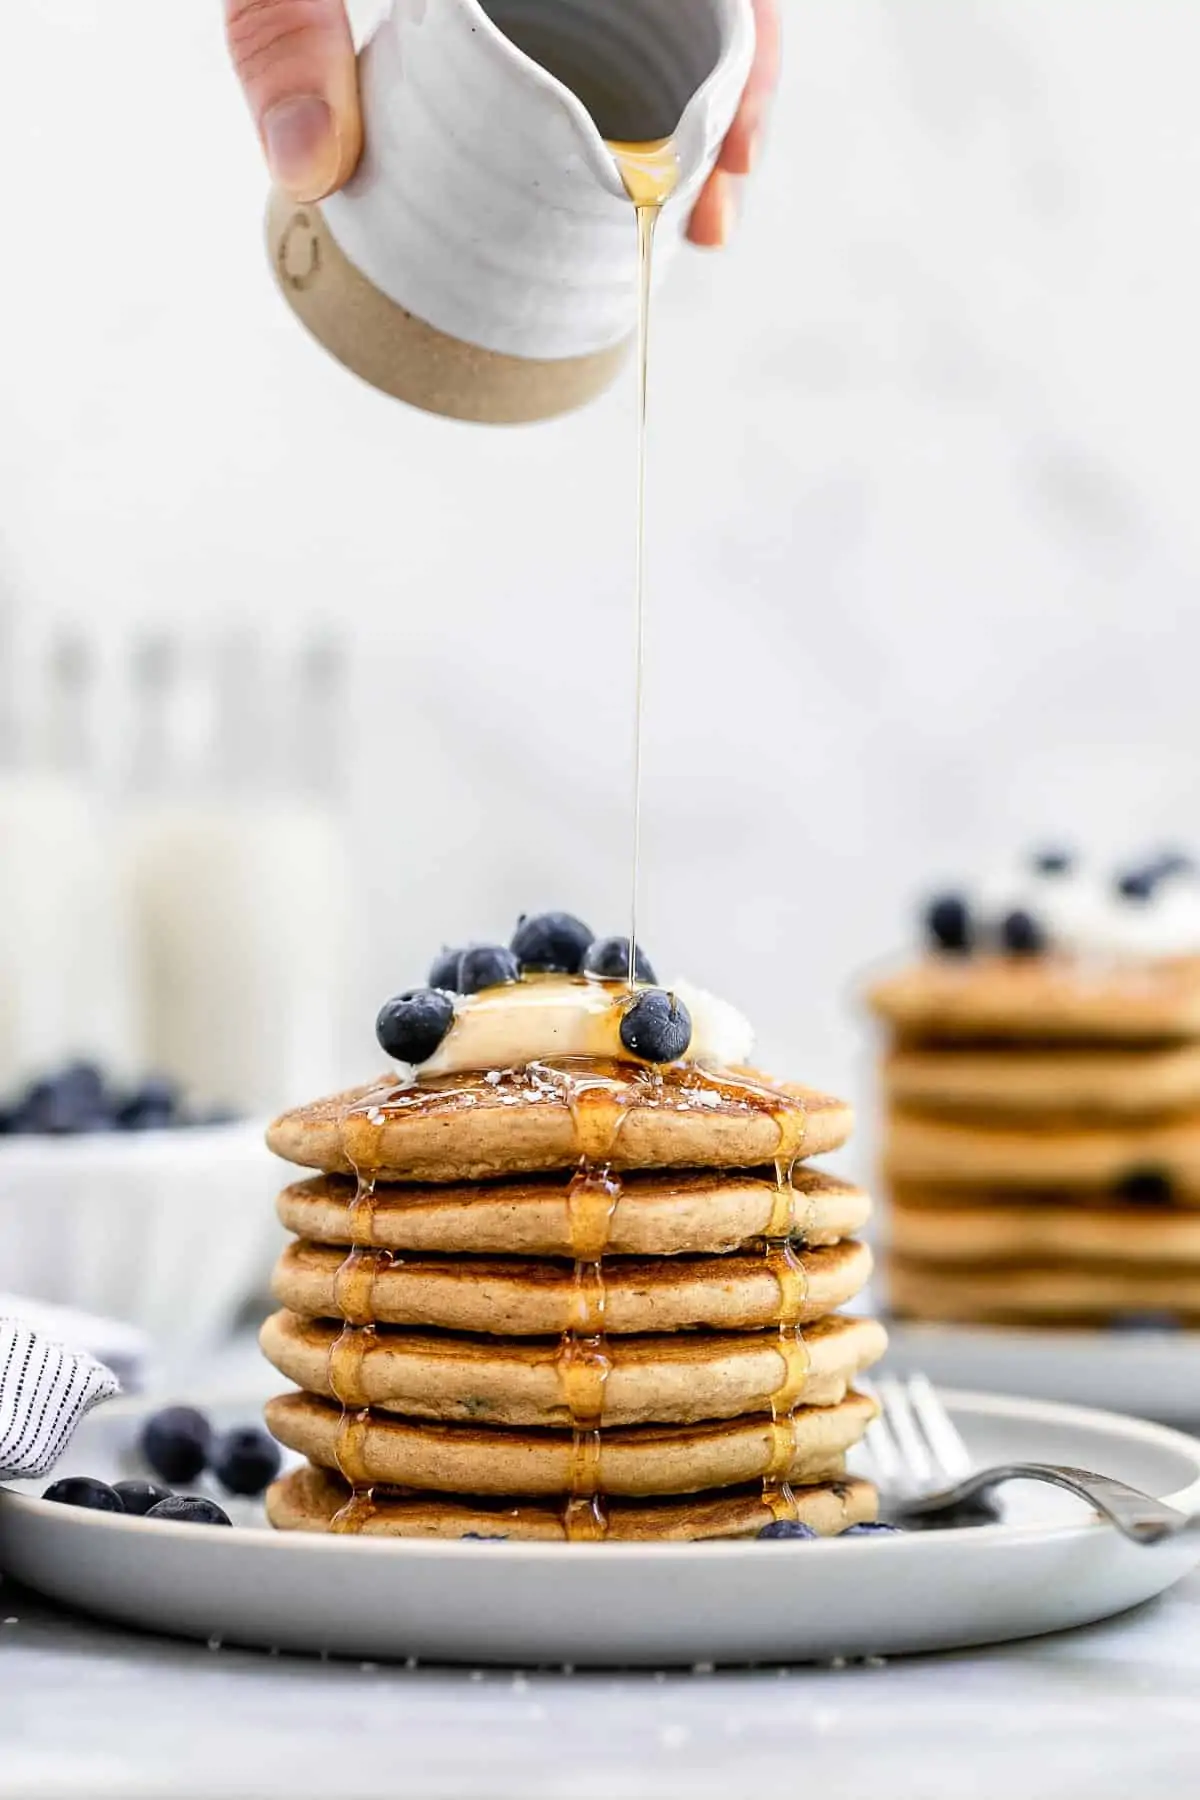 Two plates with pancakes stacked on each other with blueberries and maple syrup pouring on top.